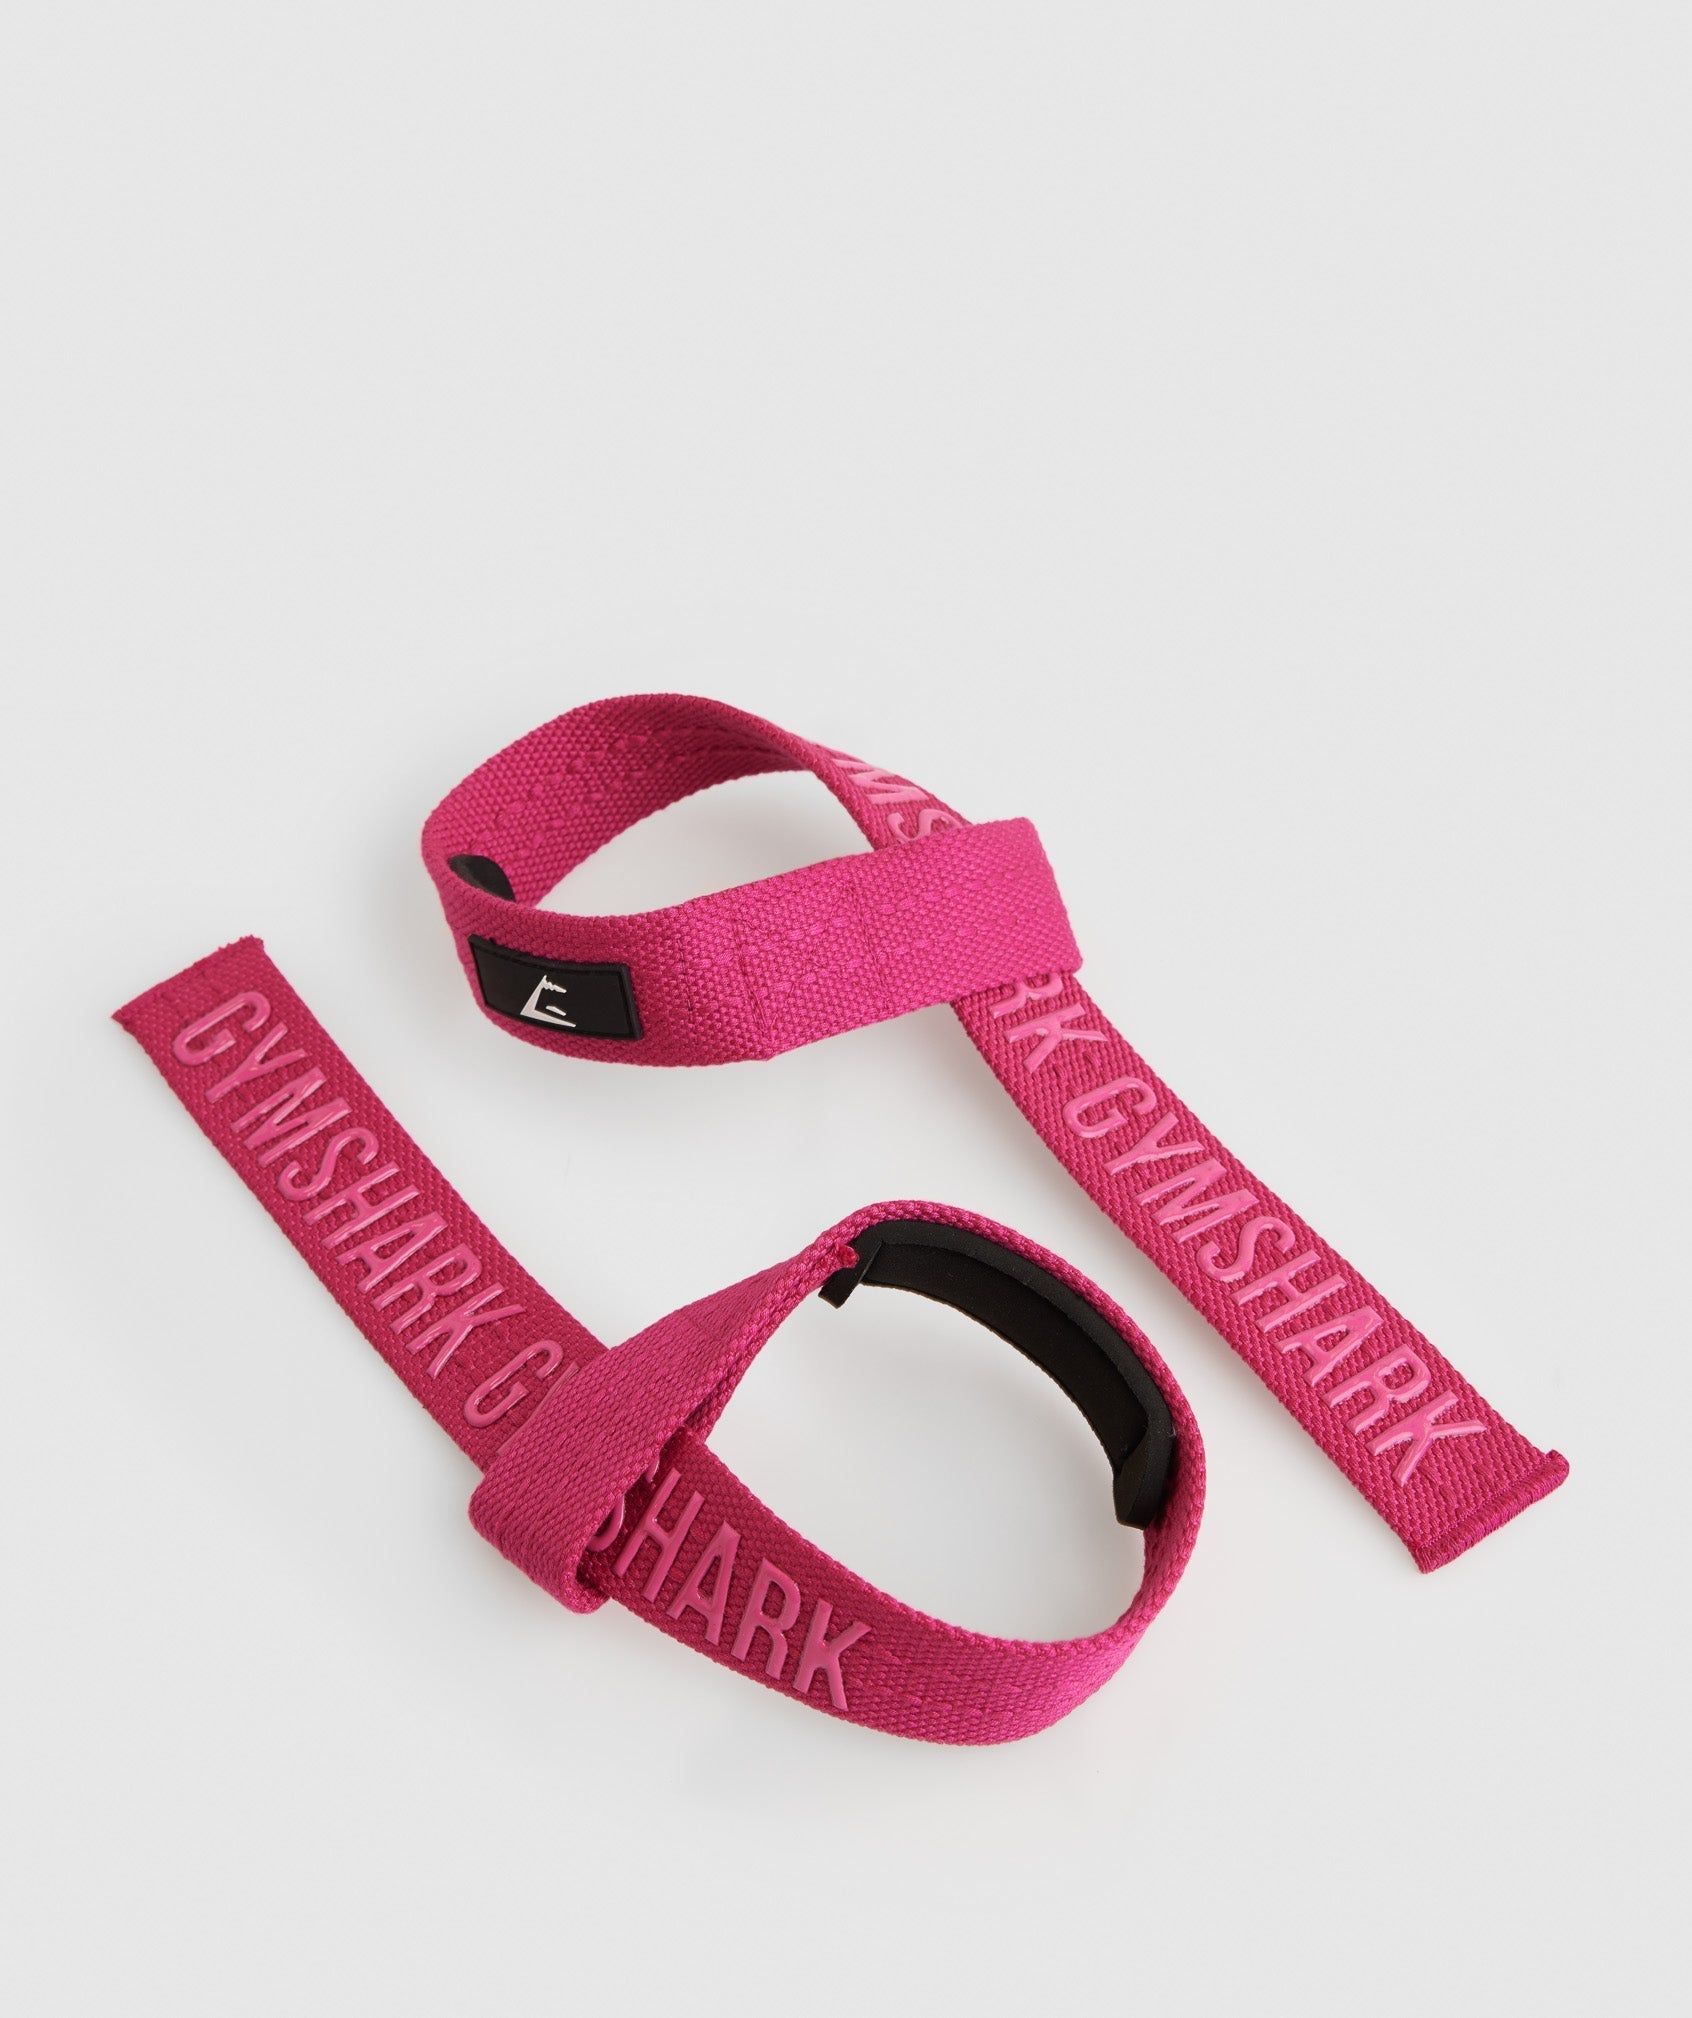 Women's Lifting Straps – Pink - Rise Canada